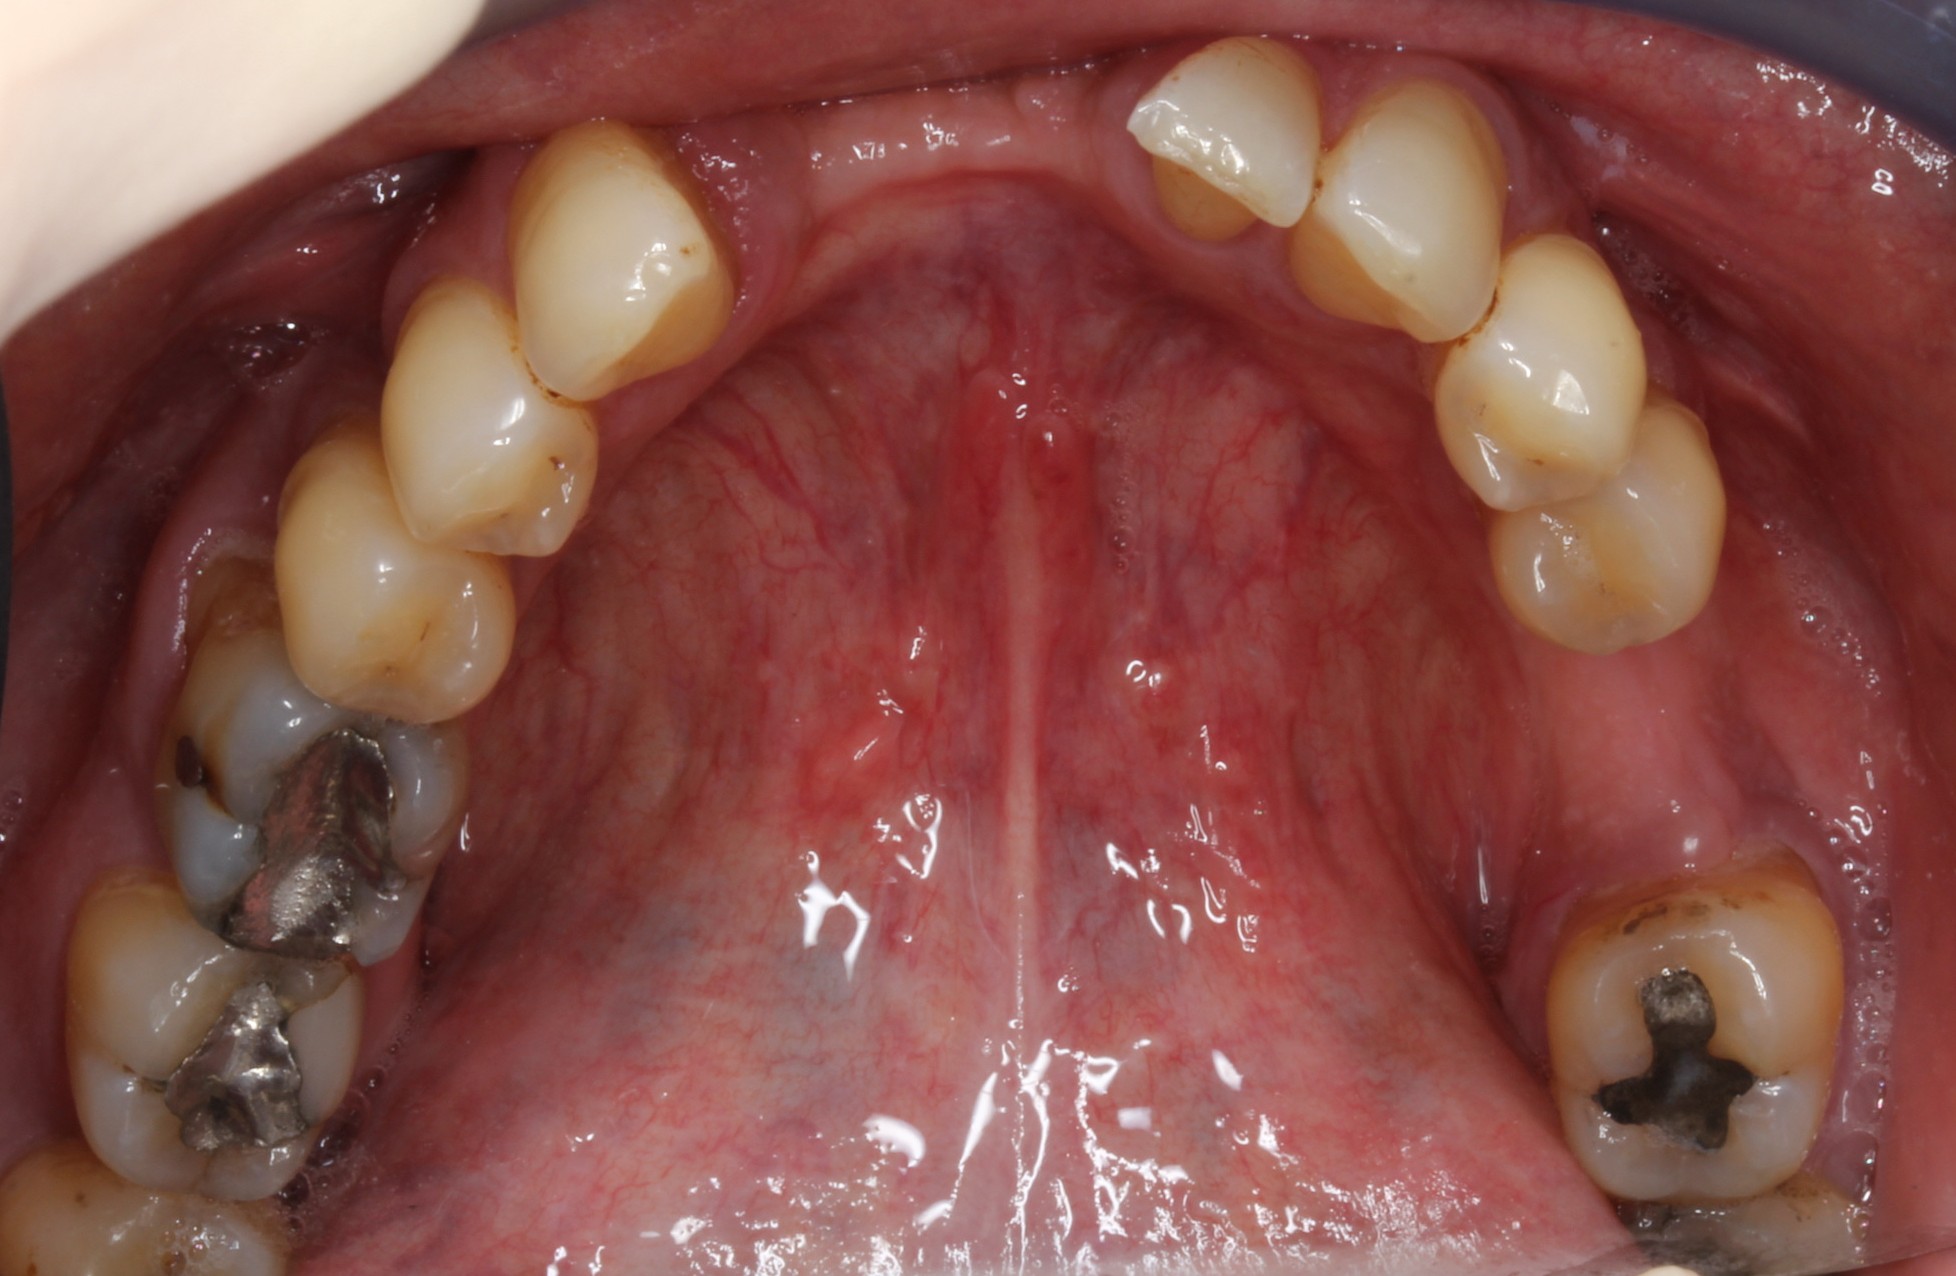 patient presented with tooth caused by sinus infection lower arch